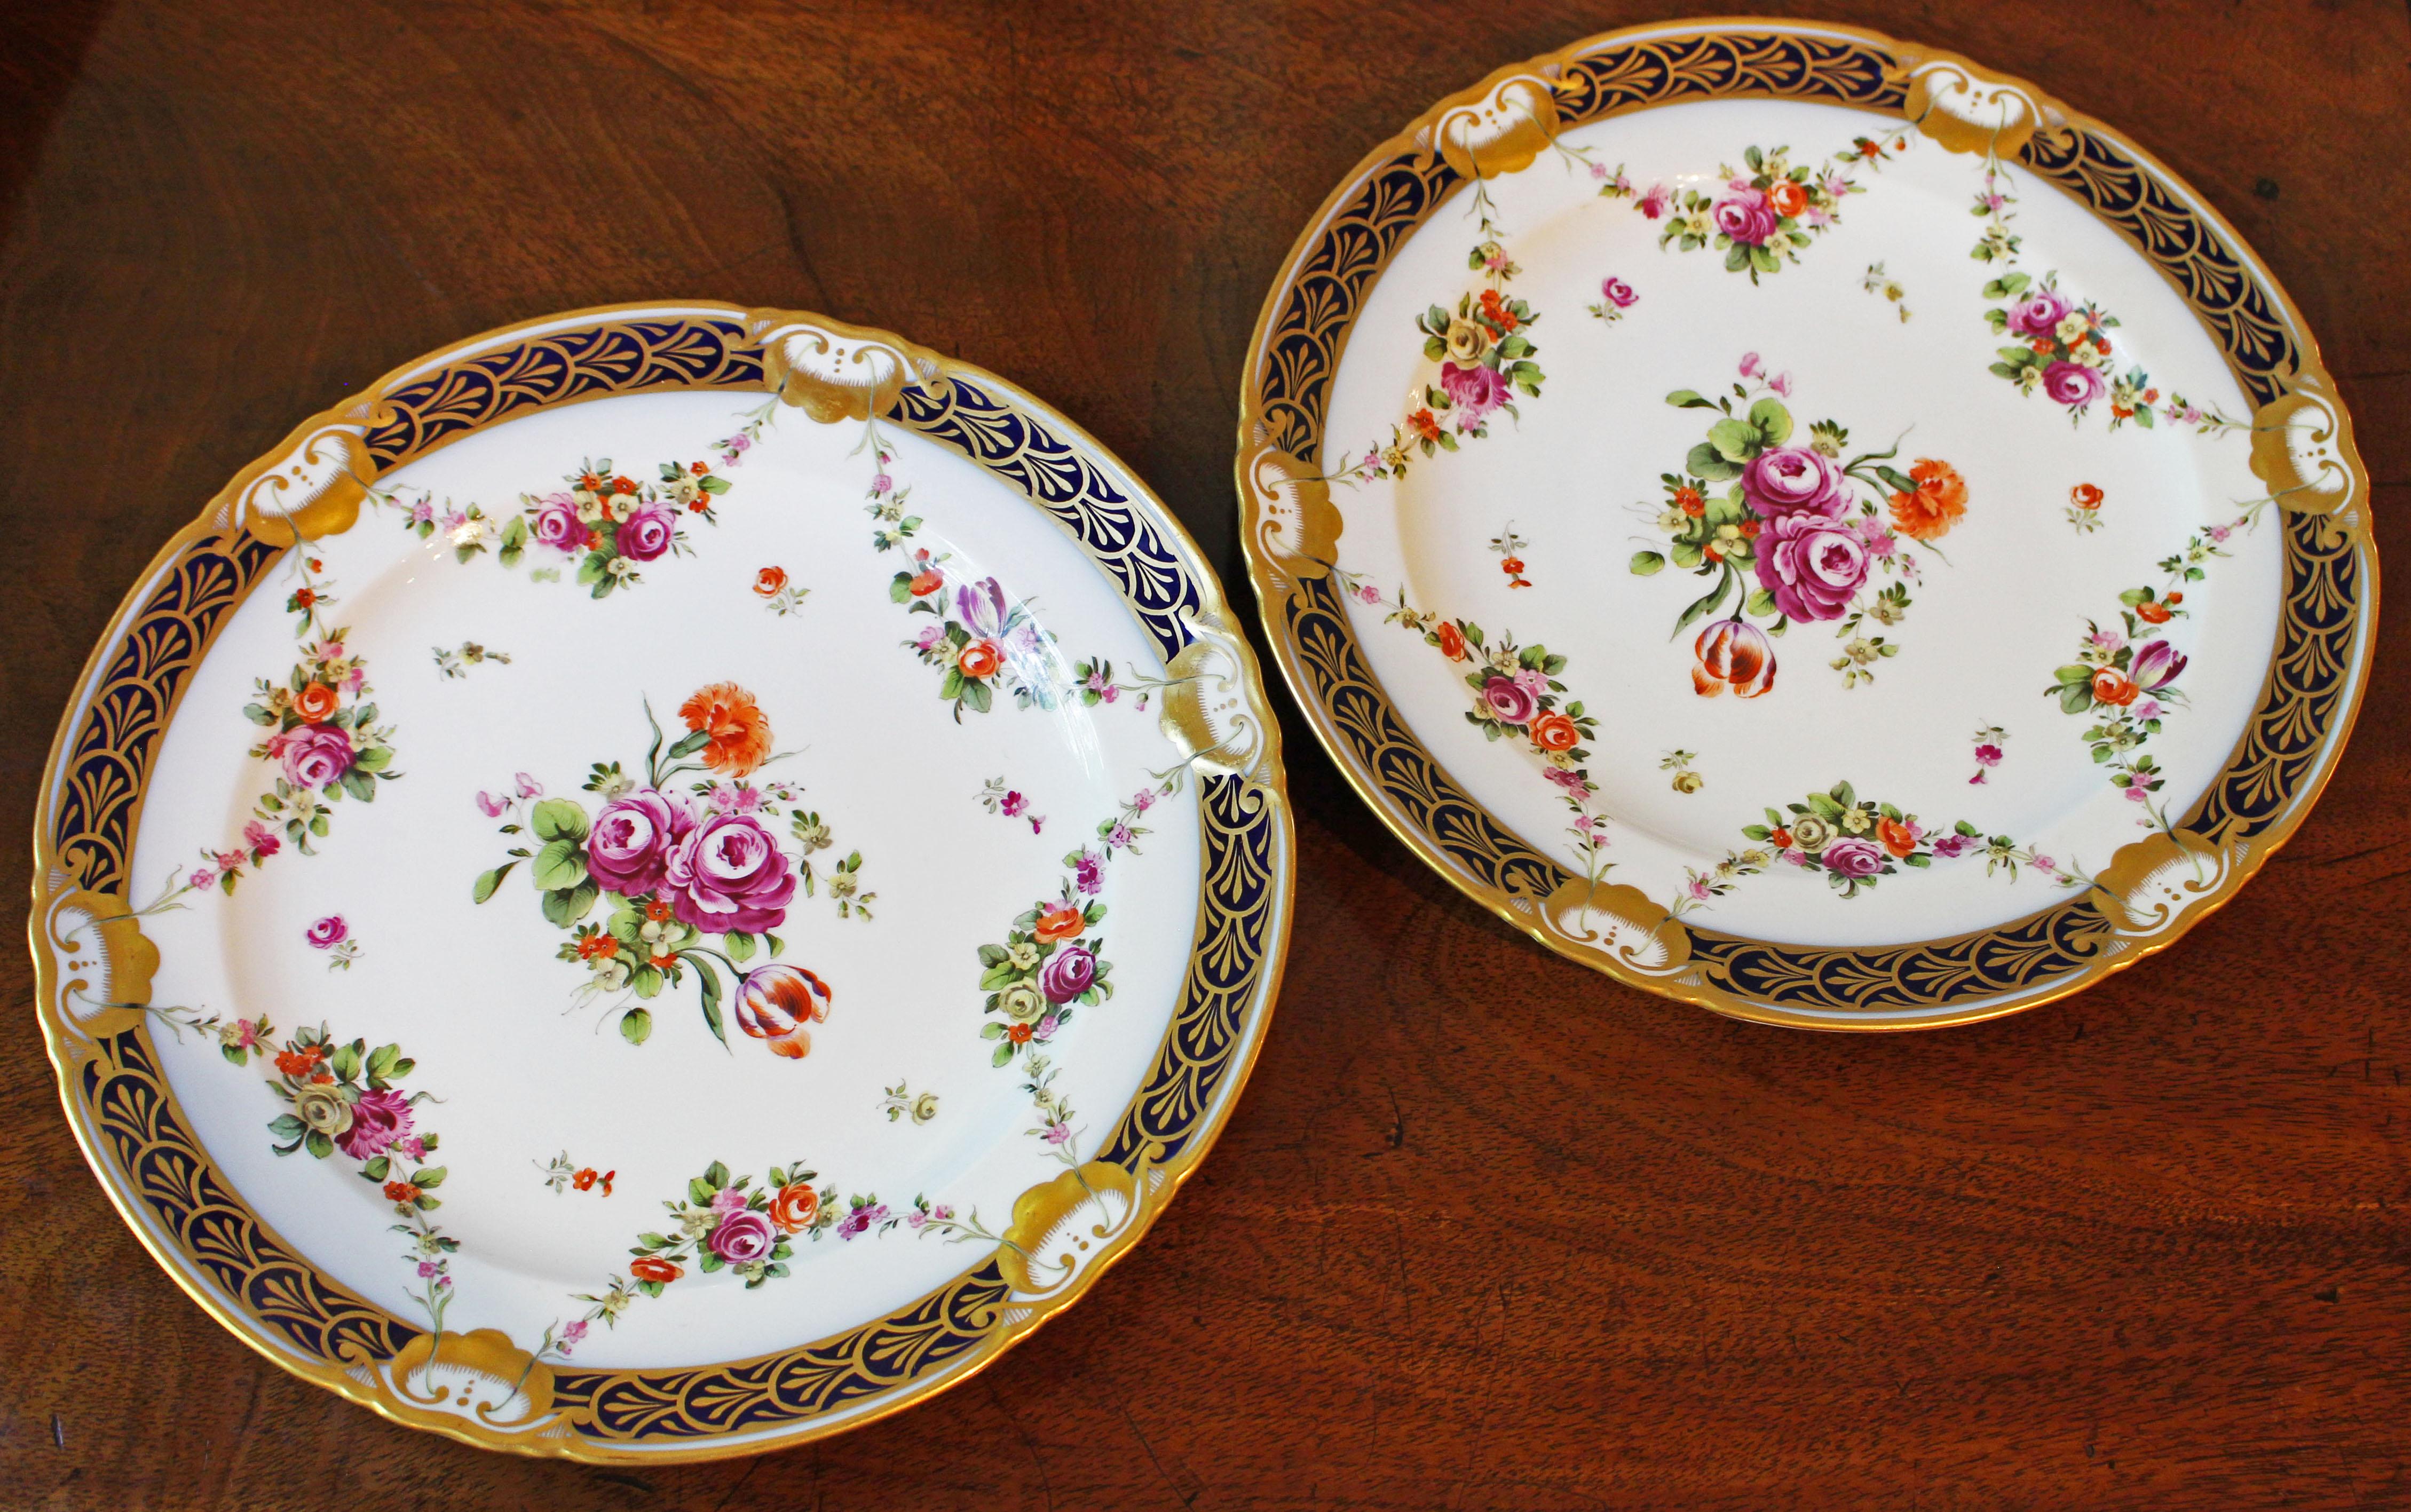 An exquisitely painted pair of cabinet plates, mid 19th century, Royal Vienna, banded in cobalt and gilt and swagged in Neo-classical taste with floral festoons. Floral central reserve. 10